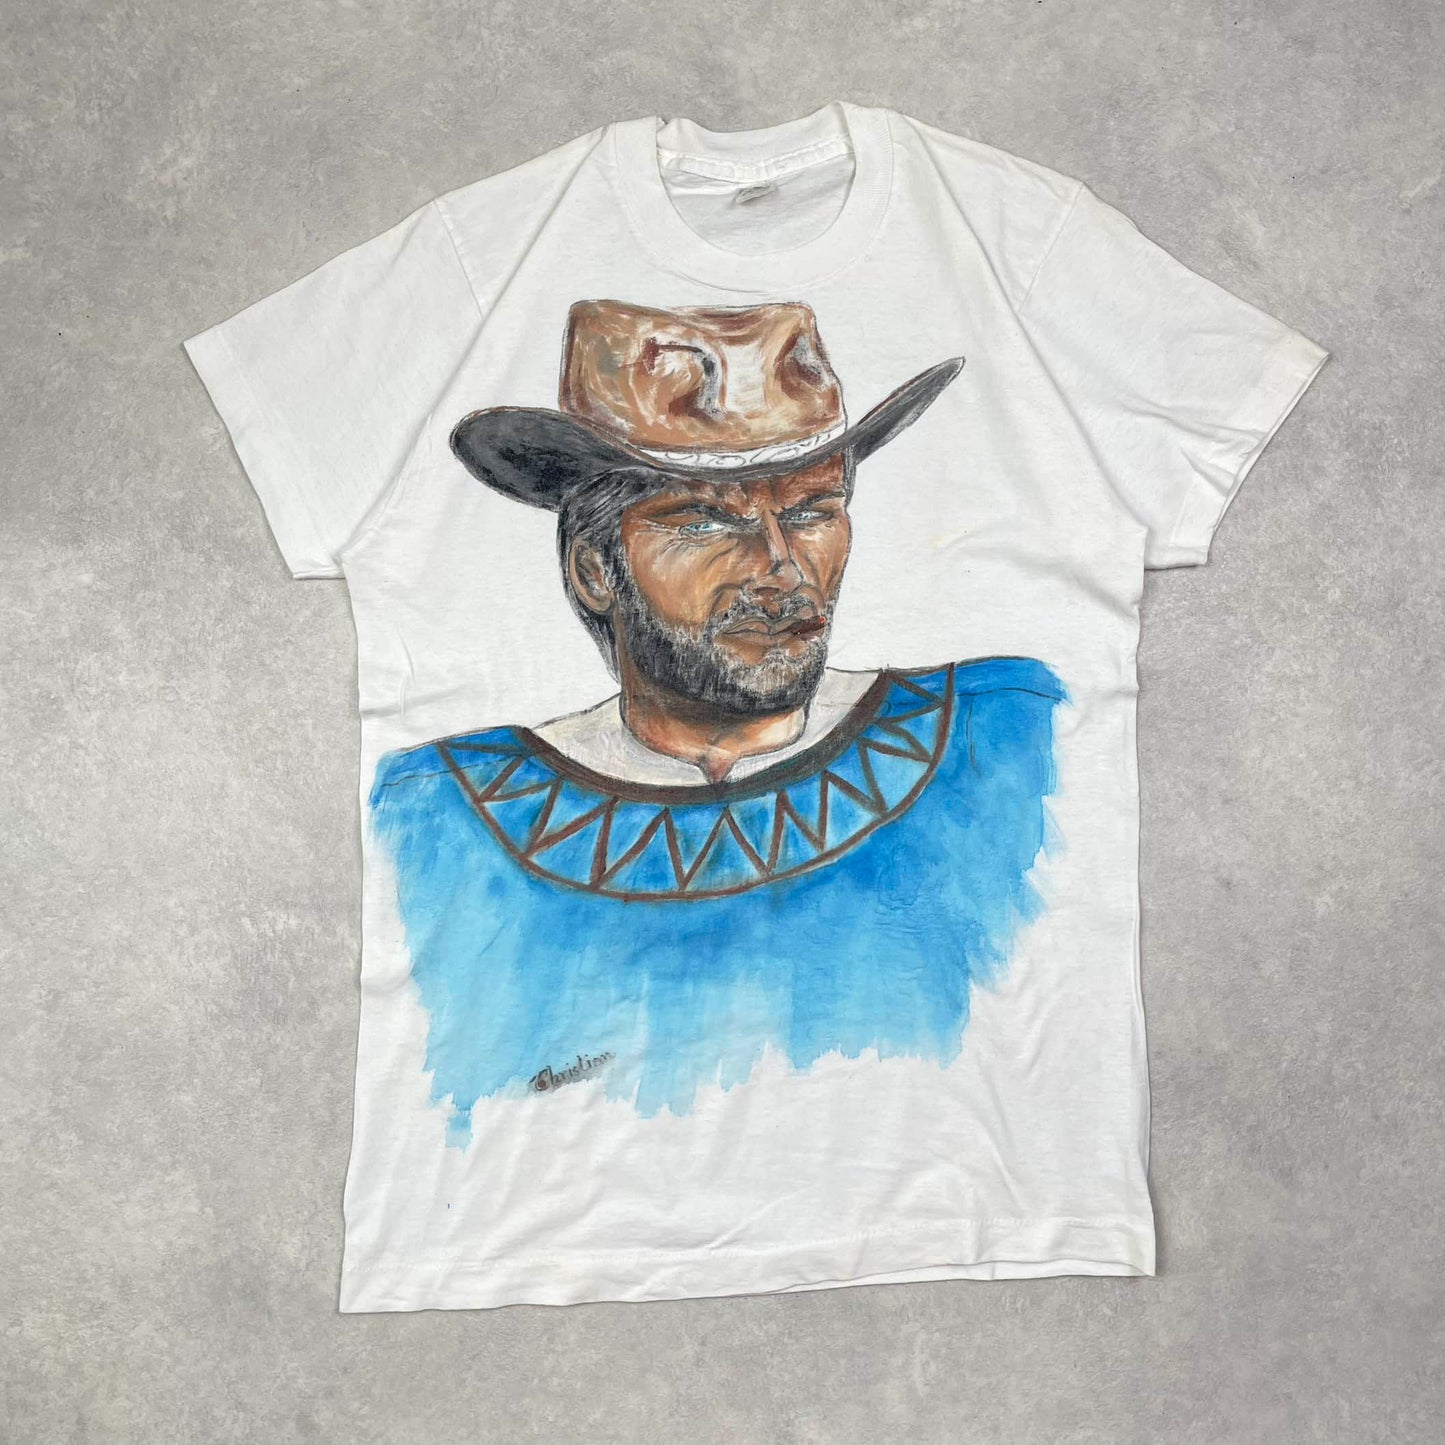 Vintage Single Stitch T-Shirt Clint Eastwood Handpainted Made in Ireland